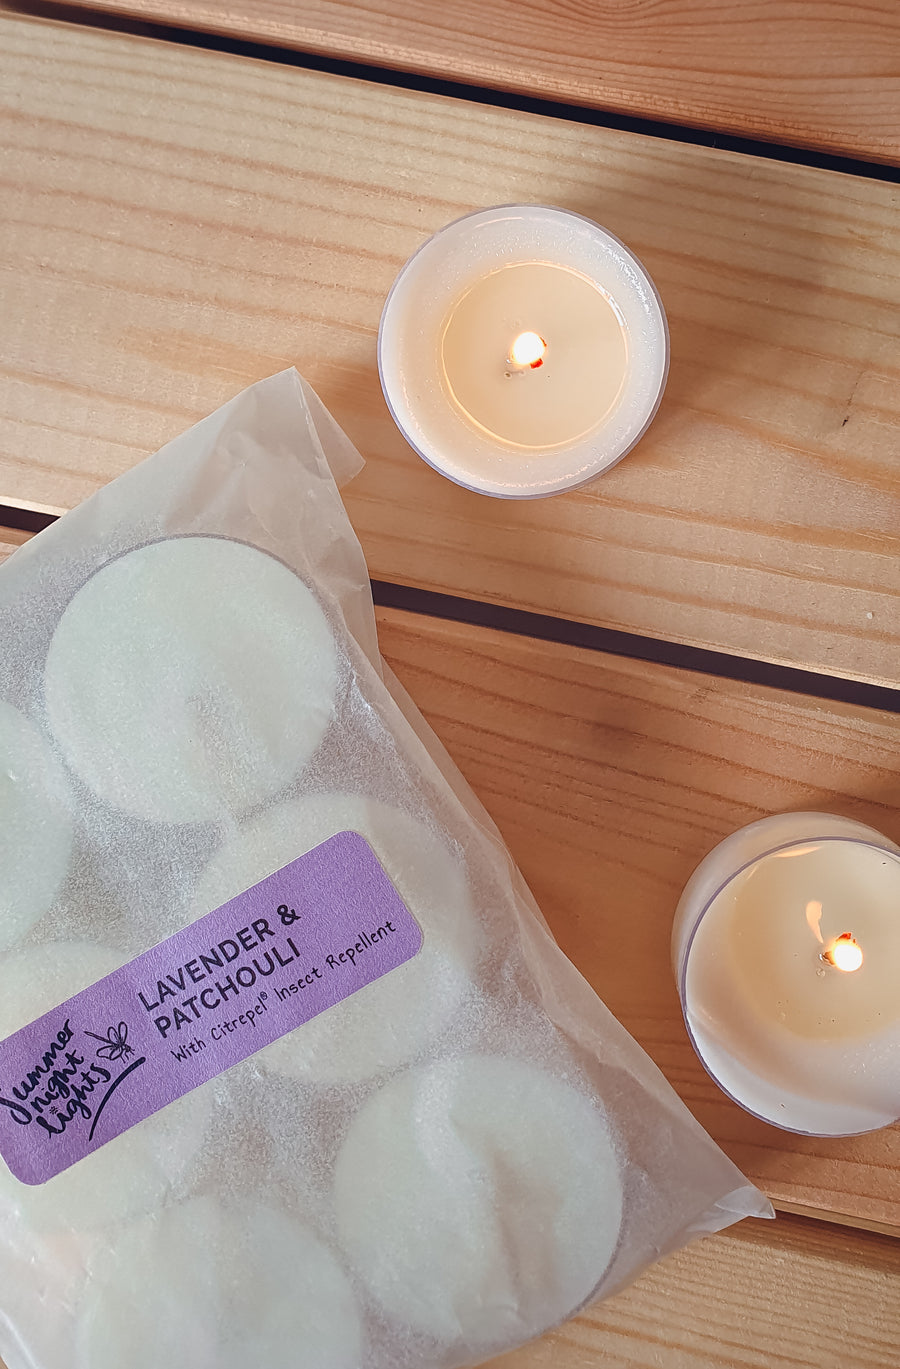 Summer Night Lights: Lavender & Patchouli Insect Repellent Candle